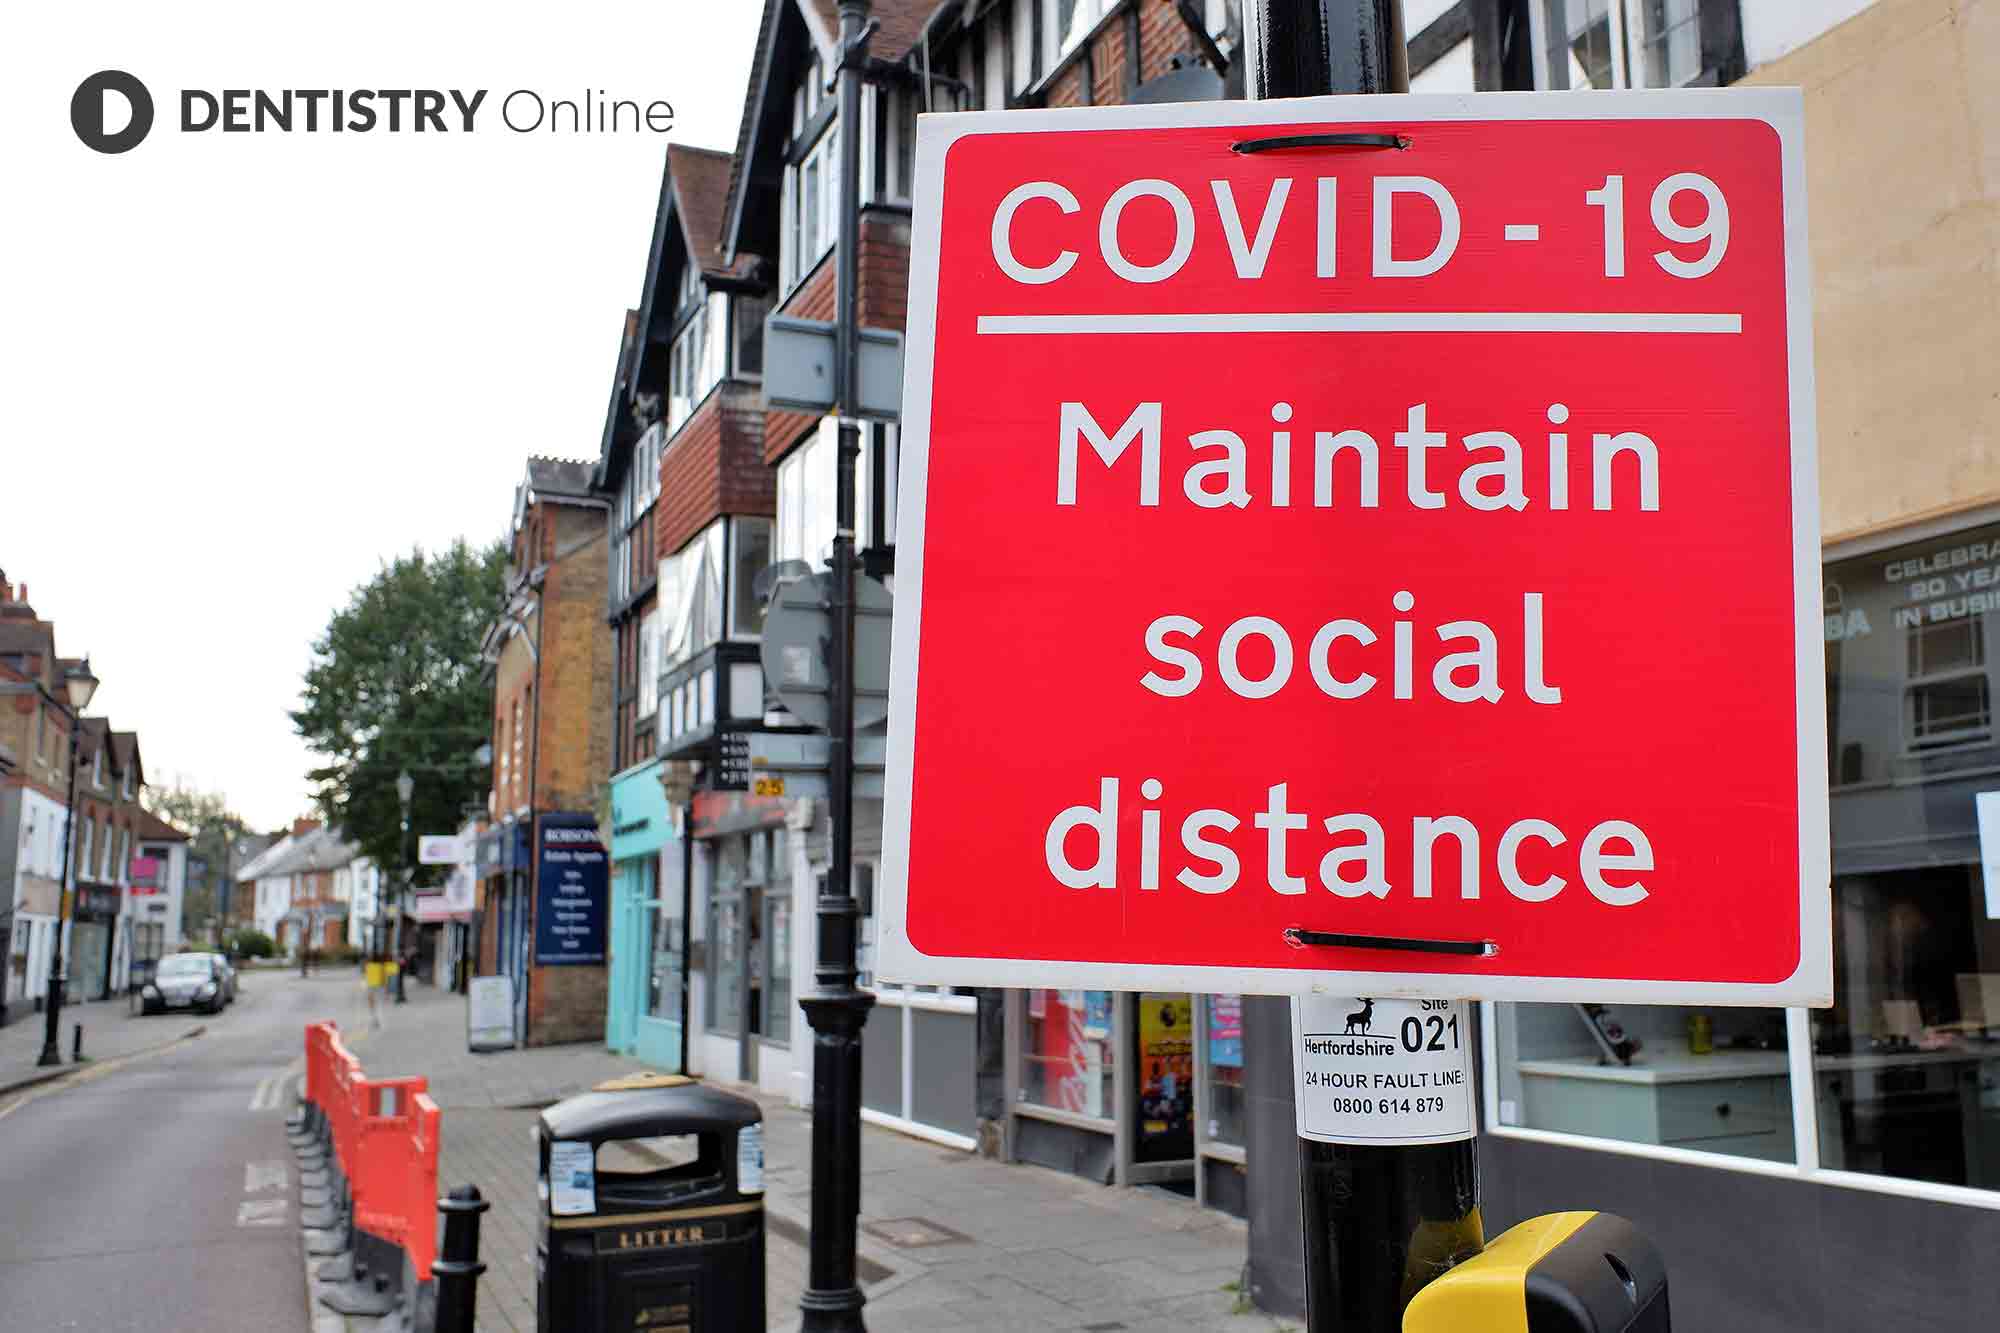 On Saturday, Prime Minister Boris Johnson announced a number of new national measures to clamp down on the surge in COVID-19 cases